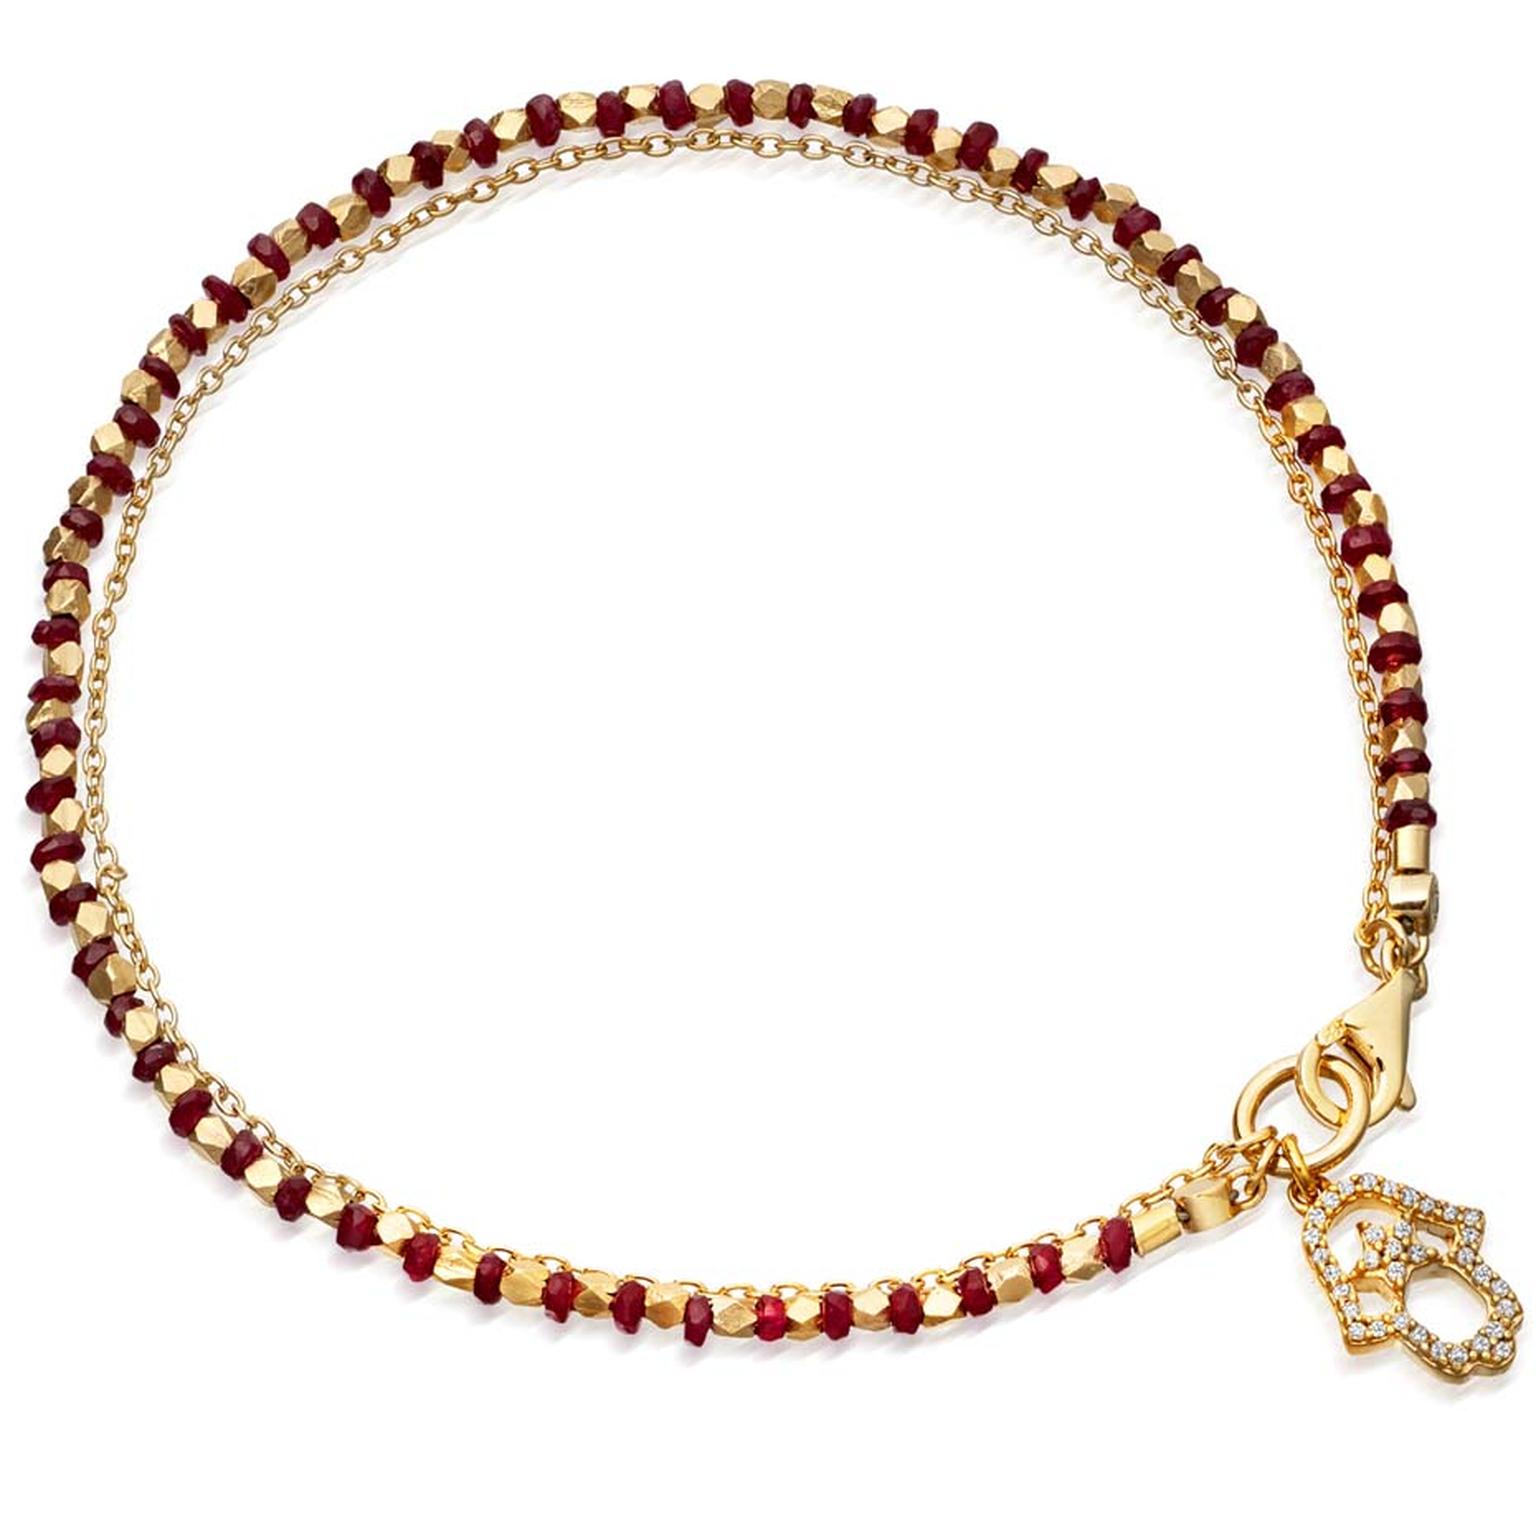 Ruby Hamsa 14ct yellow gold bracelet from Astley Clarke's fine biography collection.